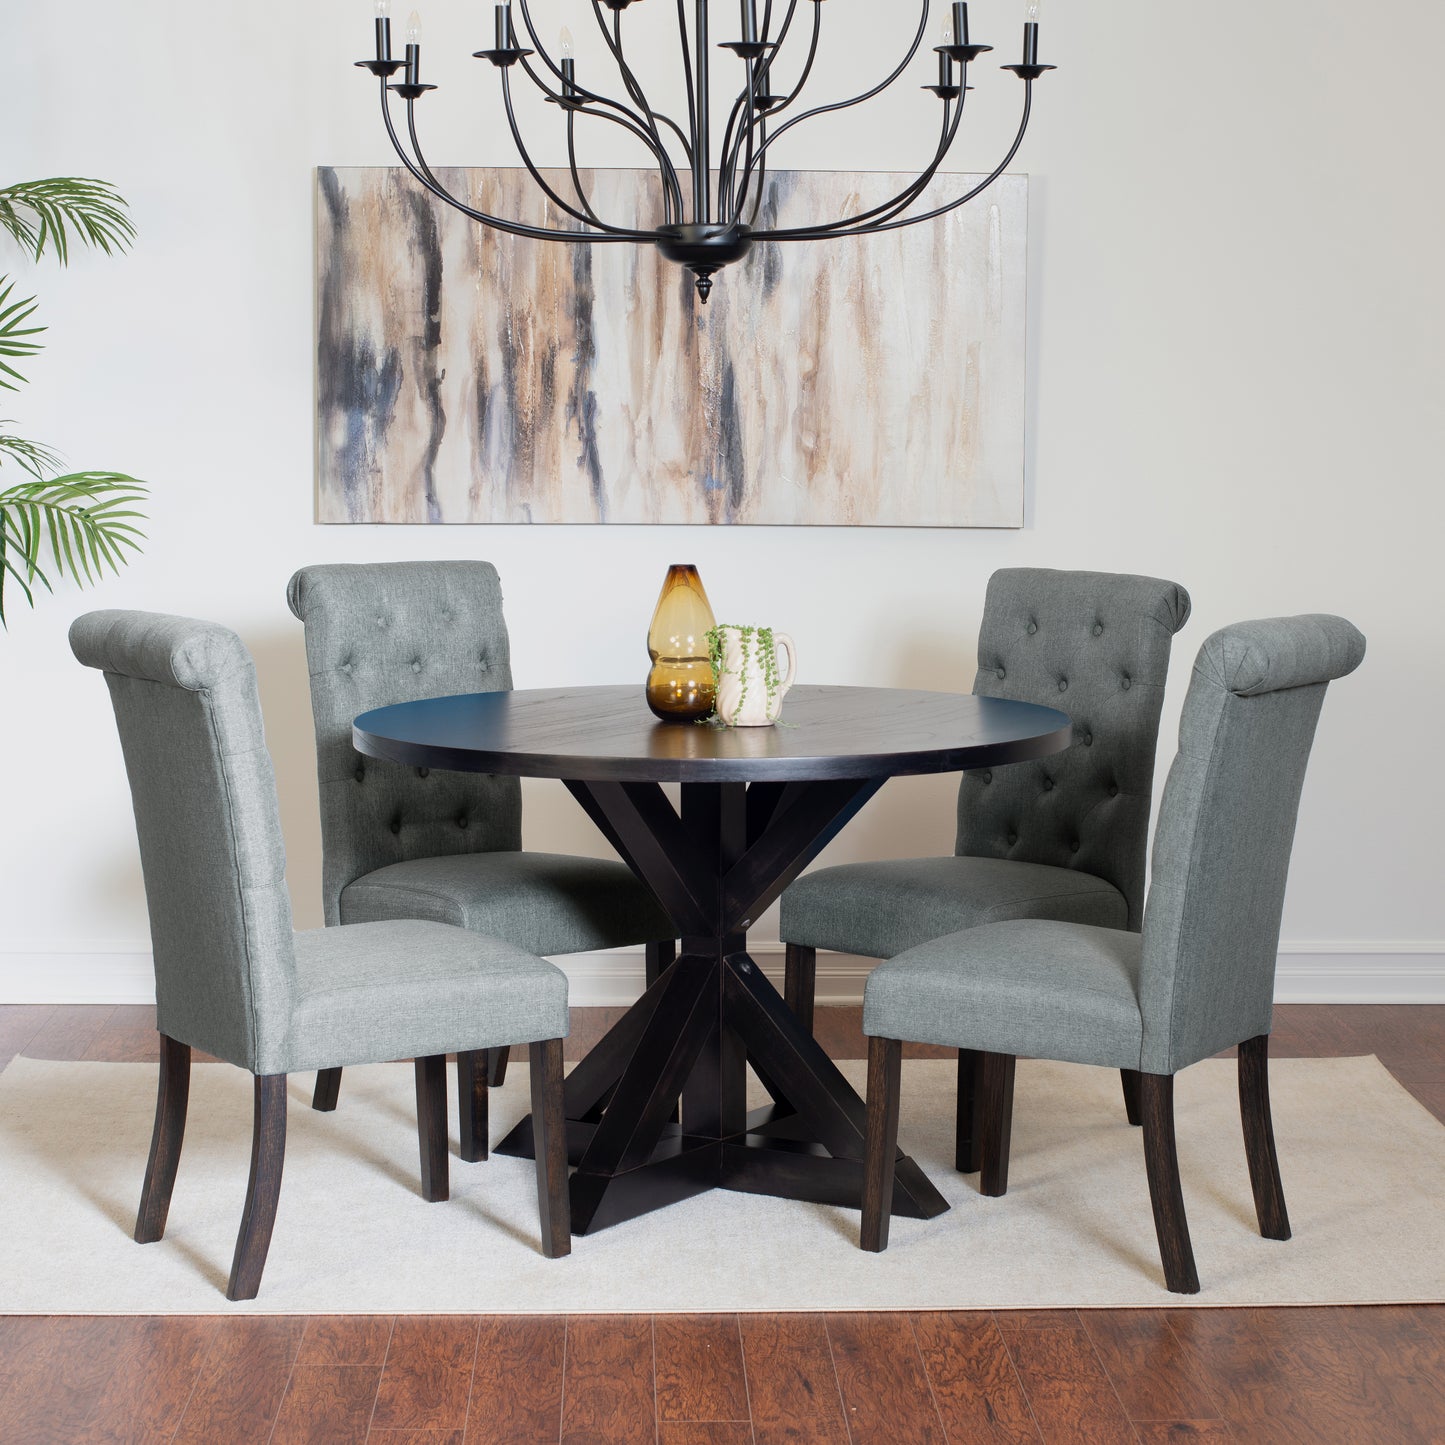 Nylander 5-piece Dining Set, Cross-Buck Dining Table with 4 Stylish Chairs